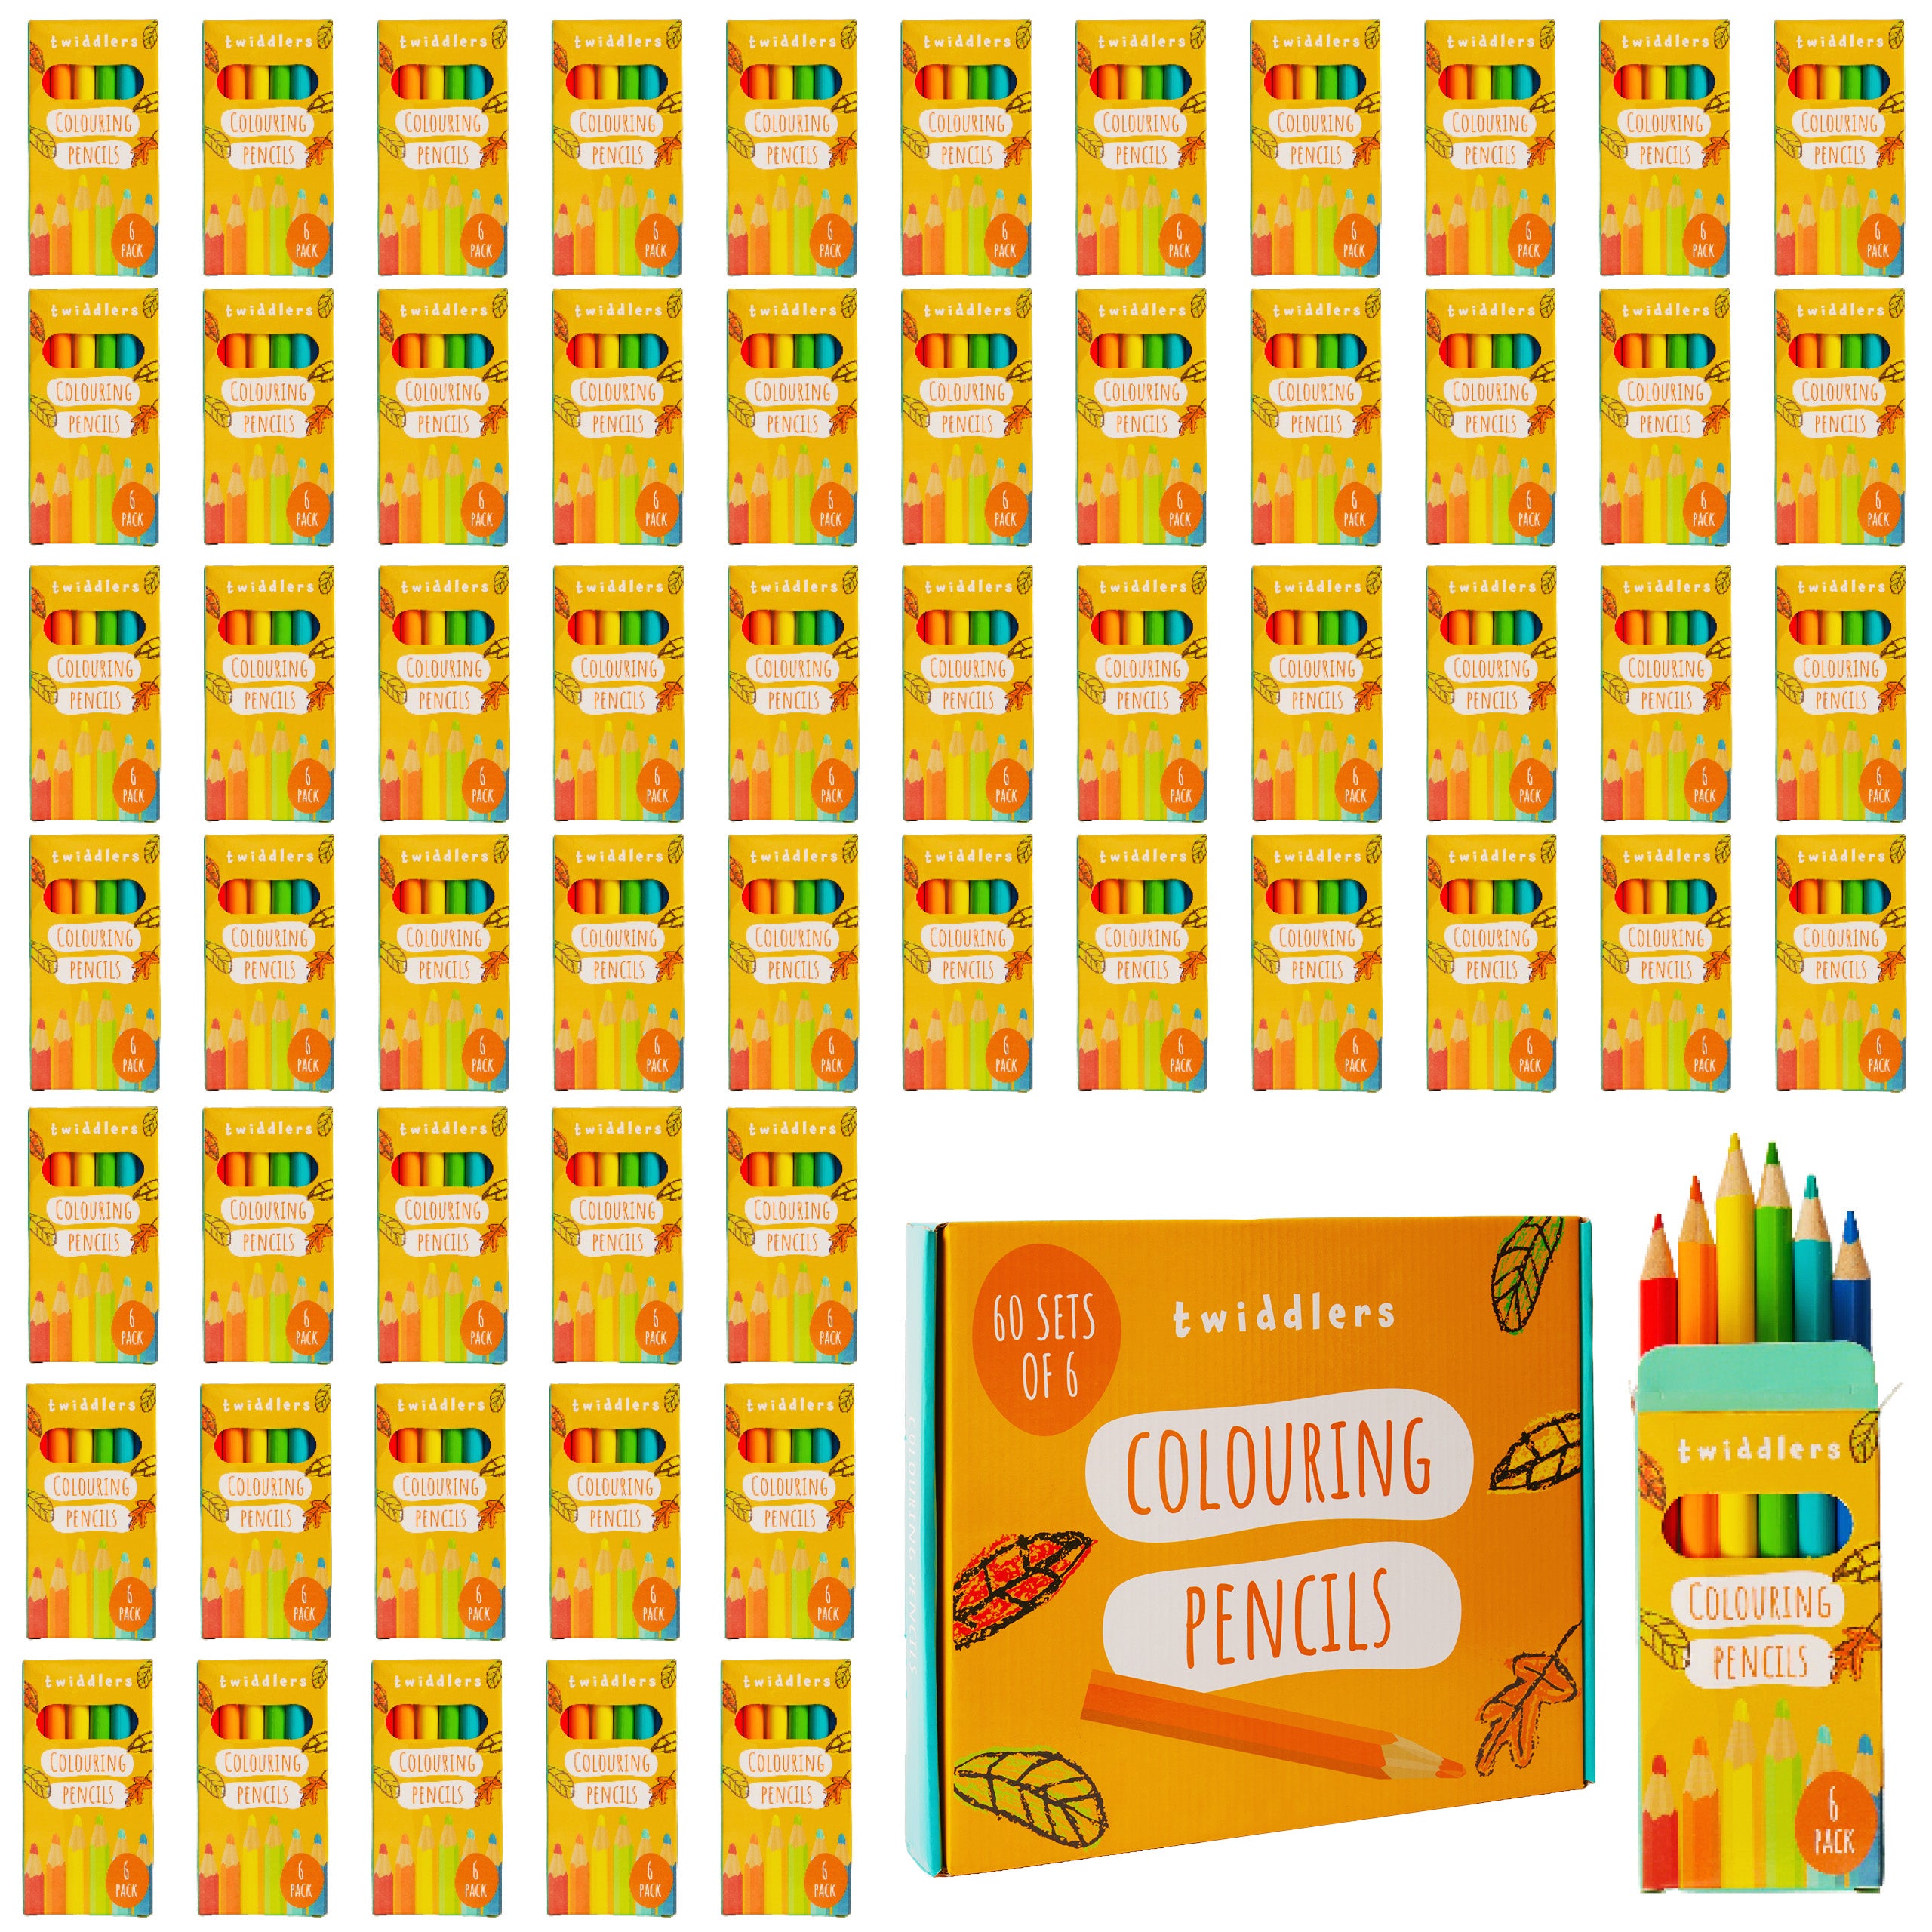 60 Sets of 6 Colouring Pencils